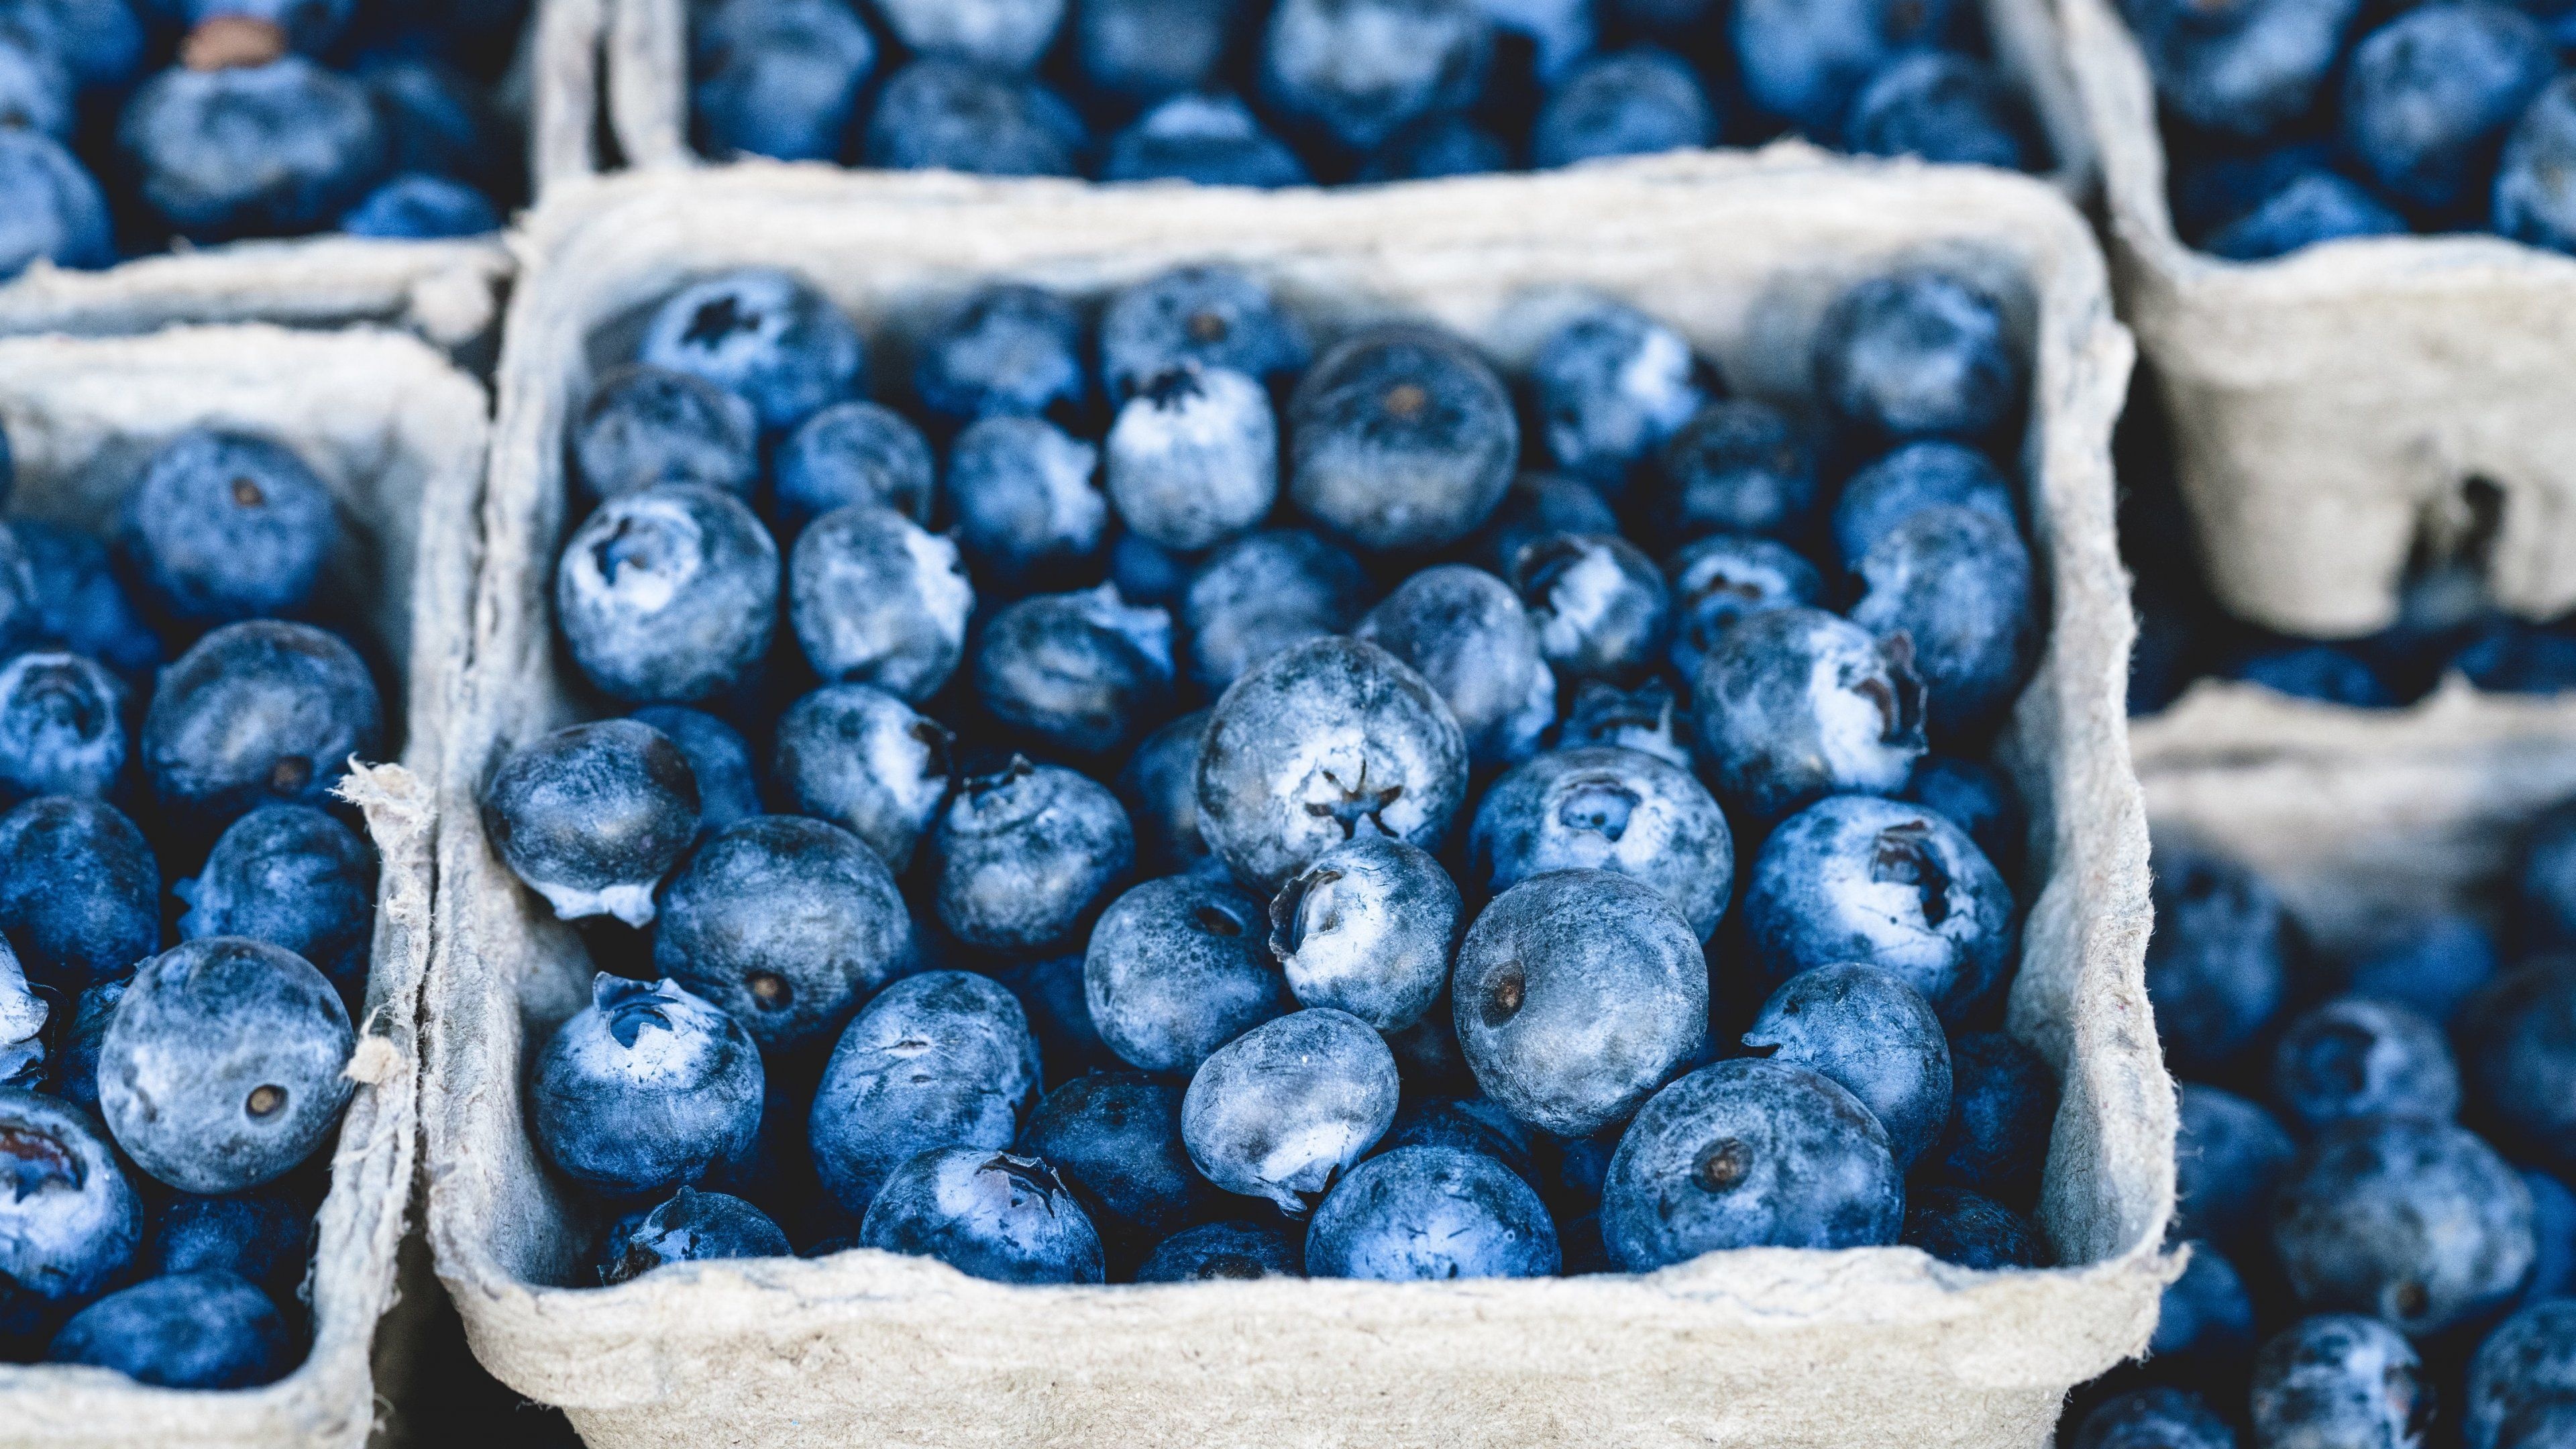 Blue food delights, Fruity goodness, Vibrant and refreshing, Delicious treats, 3840x2160 4K Desktop